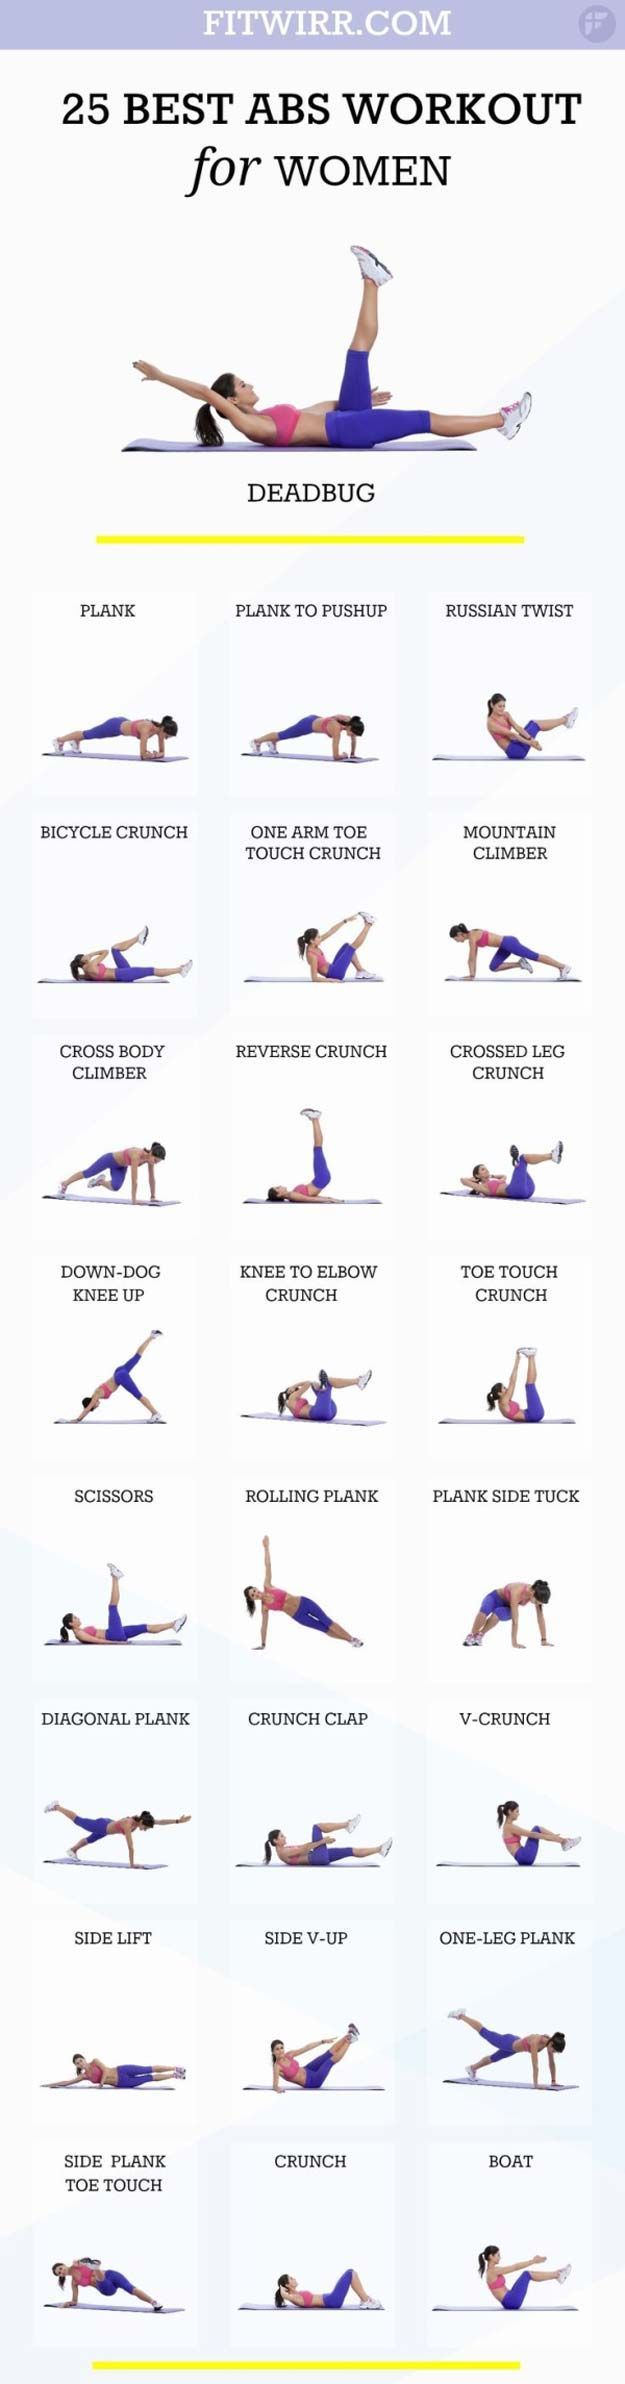 1. This workout is a great way to build your strength from holding poses. 2.This is a great workout for your abs and help you work